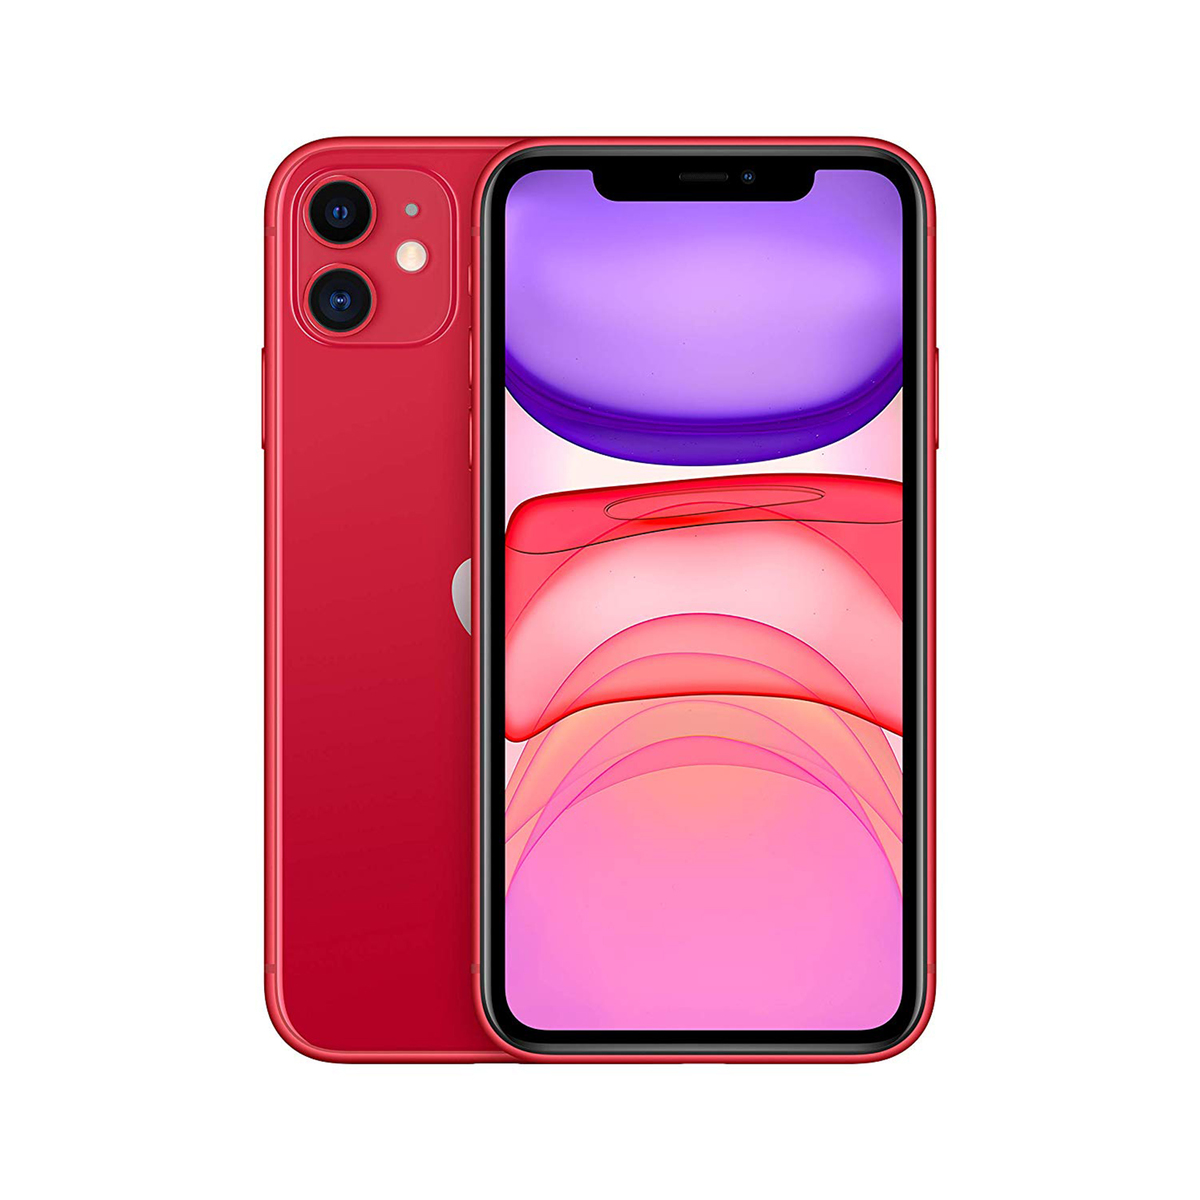 Apple iPhone 11 128GB PRODUCT(Red)